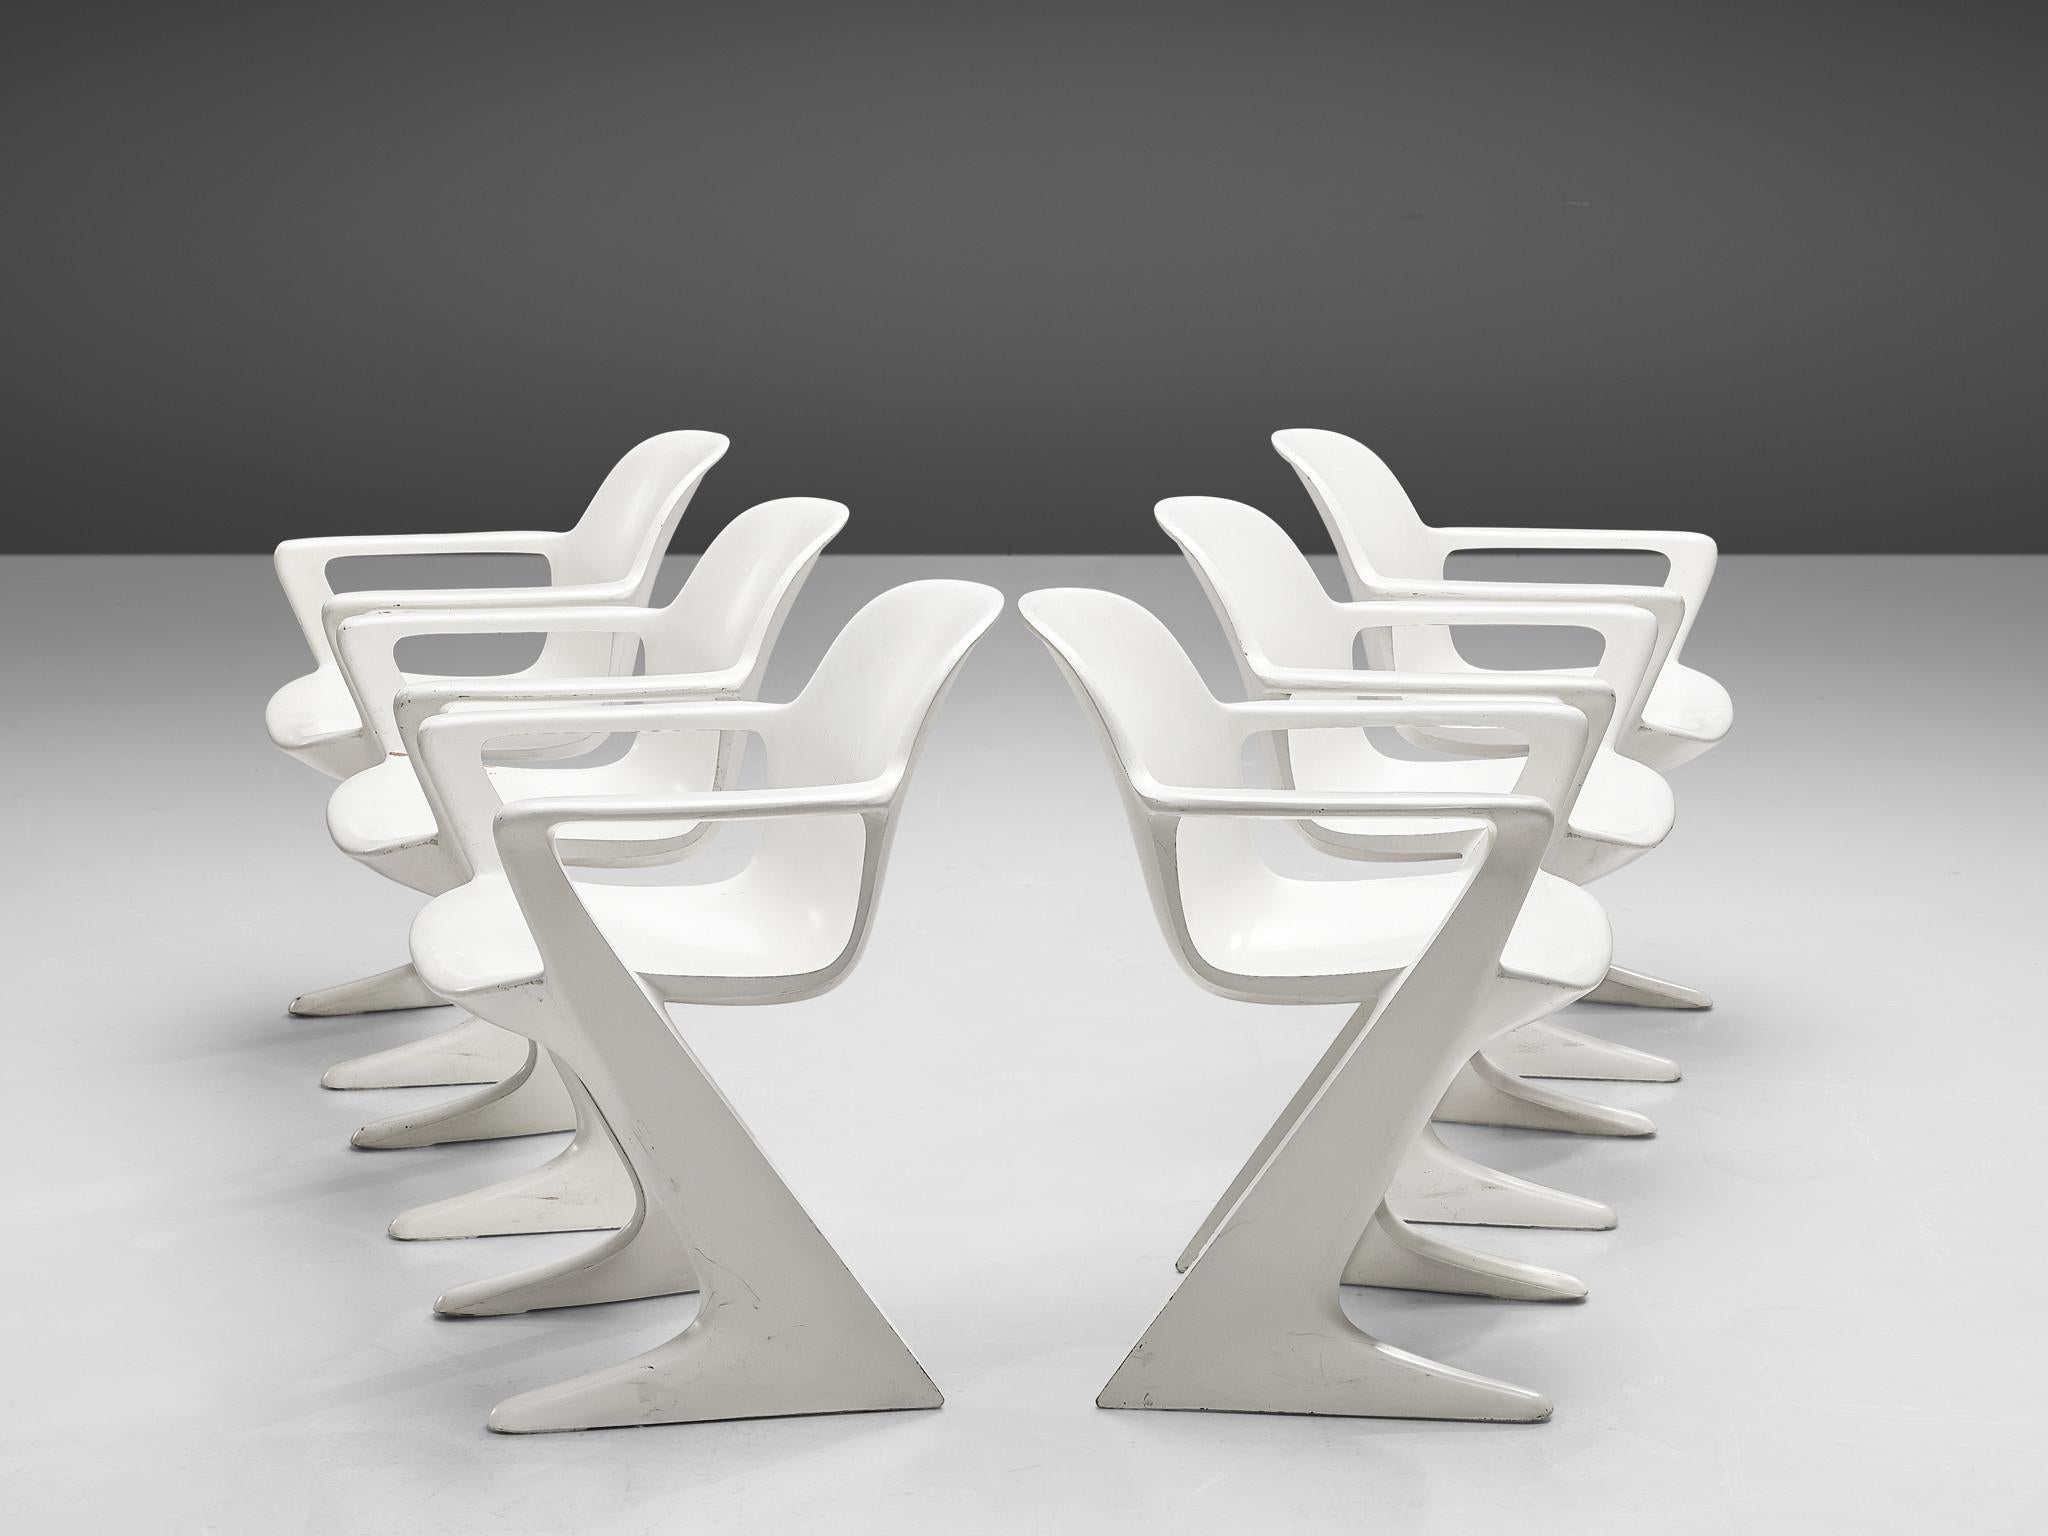 Ernst Moeckl for Trabant, 'Z' armchairs in original finish, fiberglass, Germany, 1968

This set of white Kangaroo chairs is designed by Ernst Moeckl in 1968. The chair is also called the Z-chair, referring to its shape. During the period of the Iron